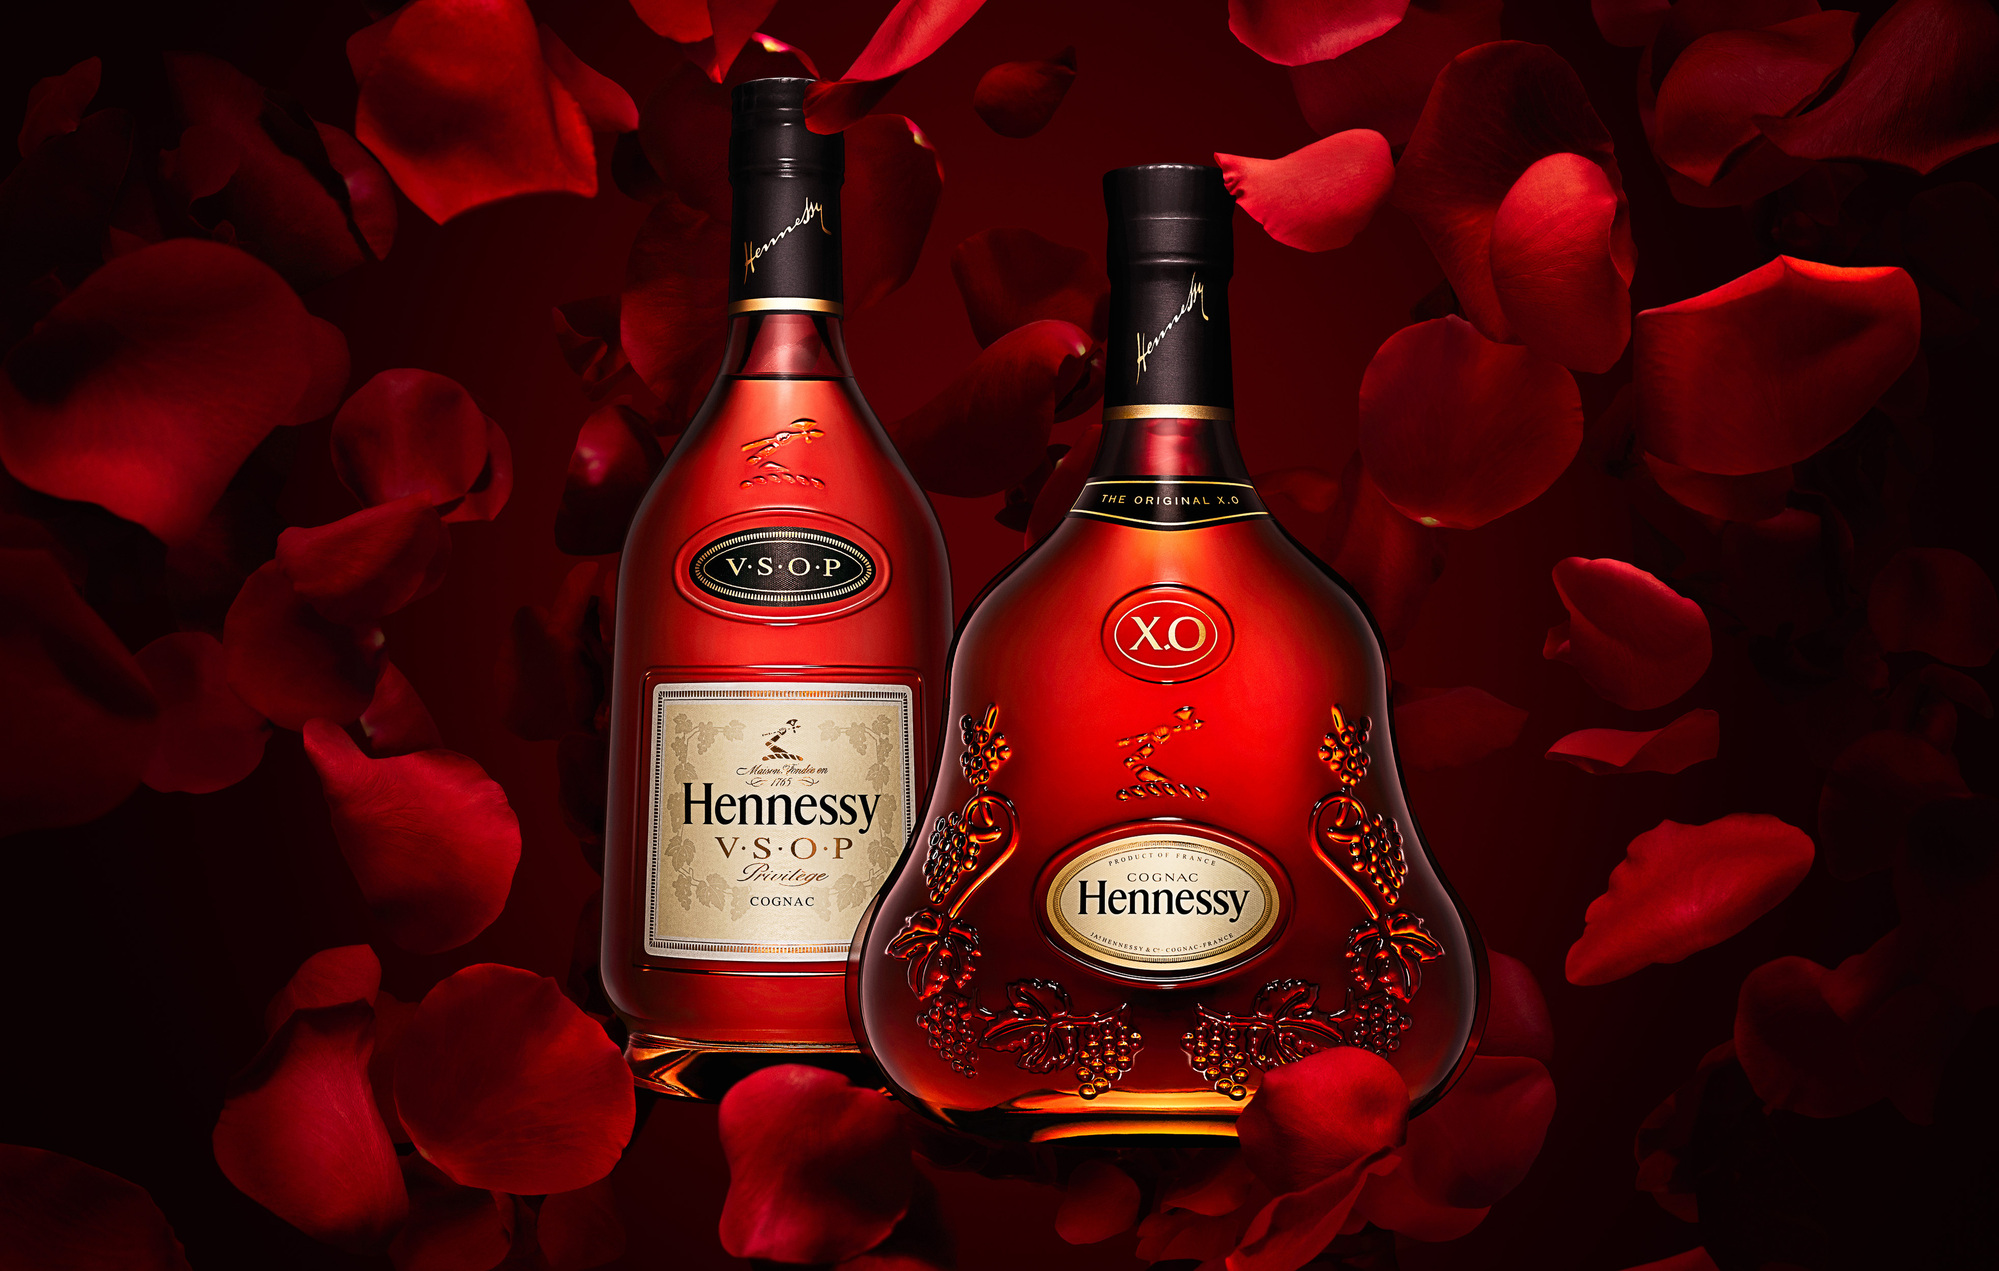 Bottles of Hennessy XO  and VSOP Cognac on deep red background with exploding rose petals.  Beverages and alcohol product & advertising photography by Timothy Hogan Studio in Los Angeles